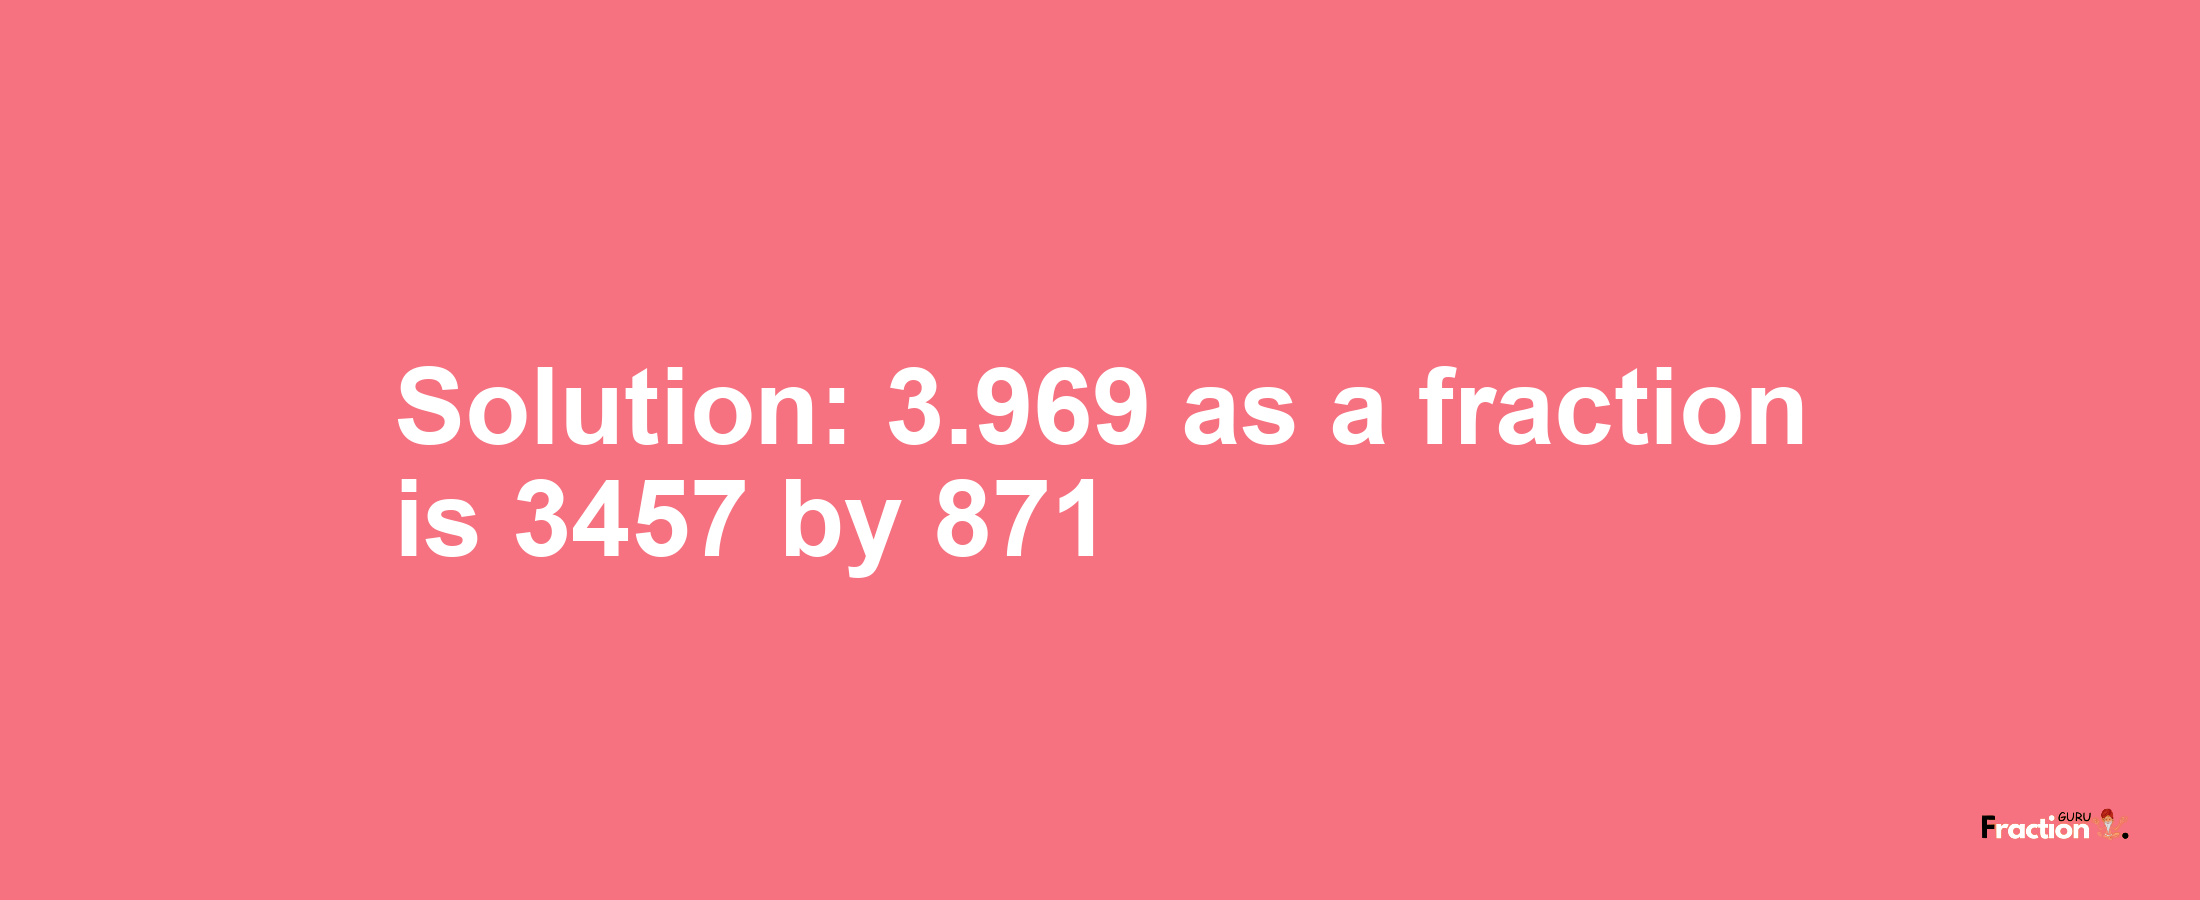 Solution:3.969 as a fraction is 3457/871